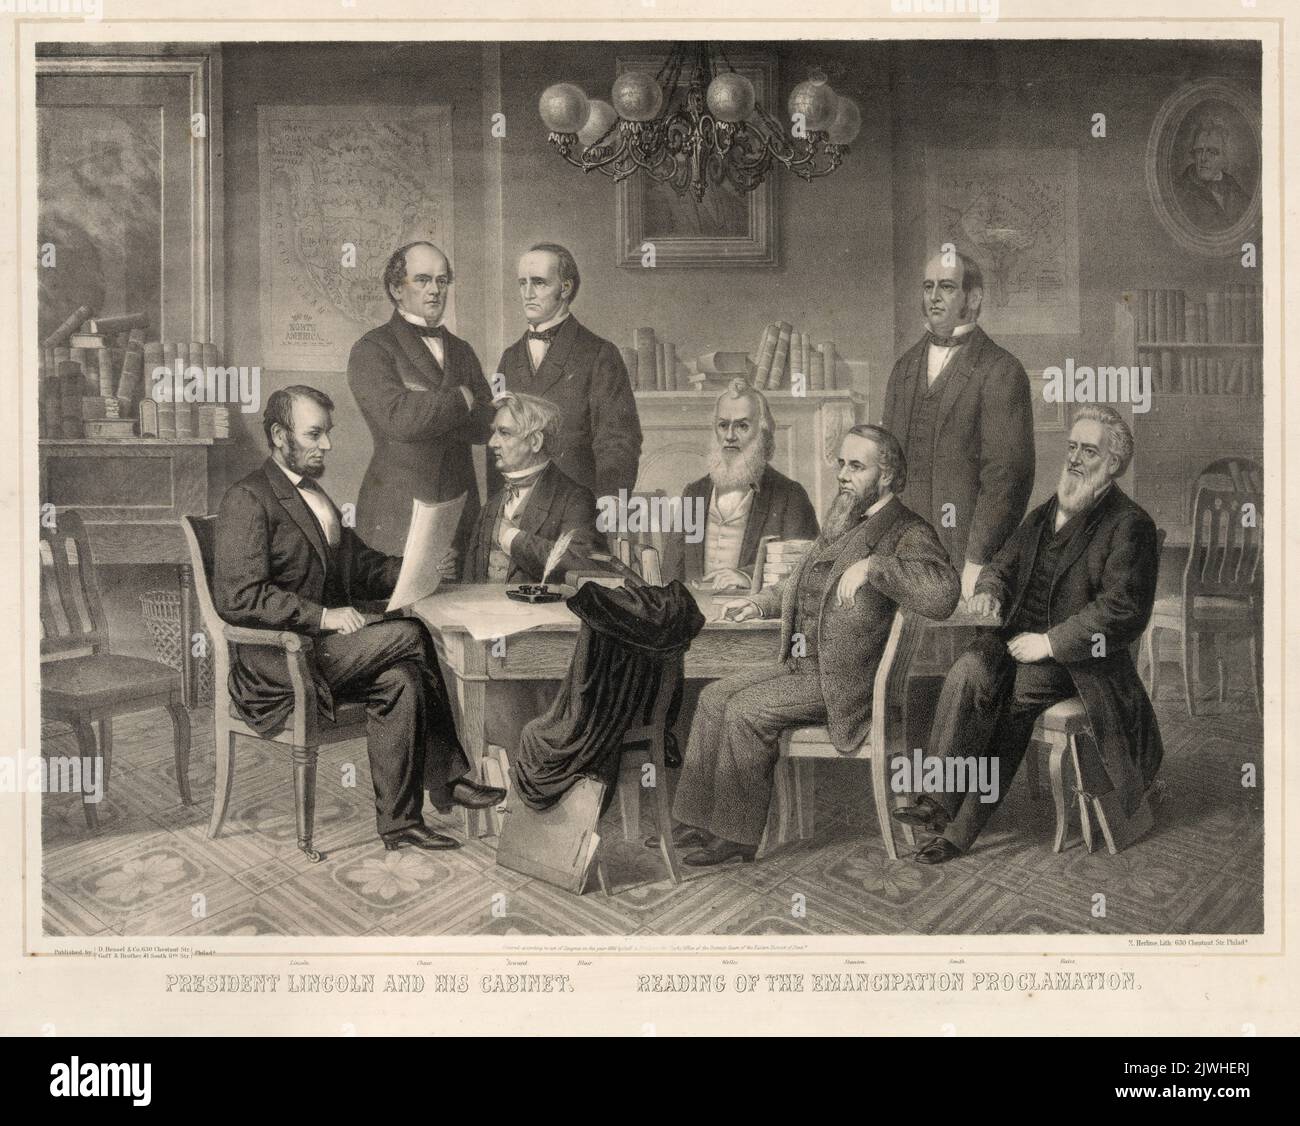 President Abraham Lincoln and his cabinet. Reading of the emancipation proclamation (also known as the Freedom Proclamation) and officially called Proclamation 95. Stock Photo